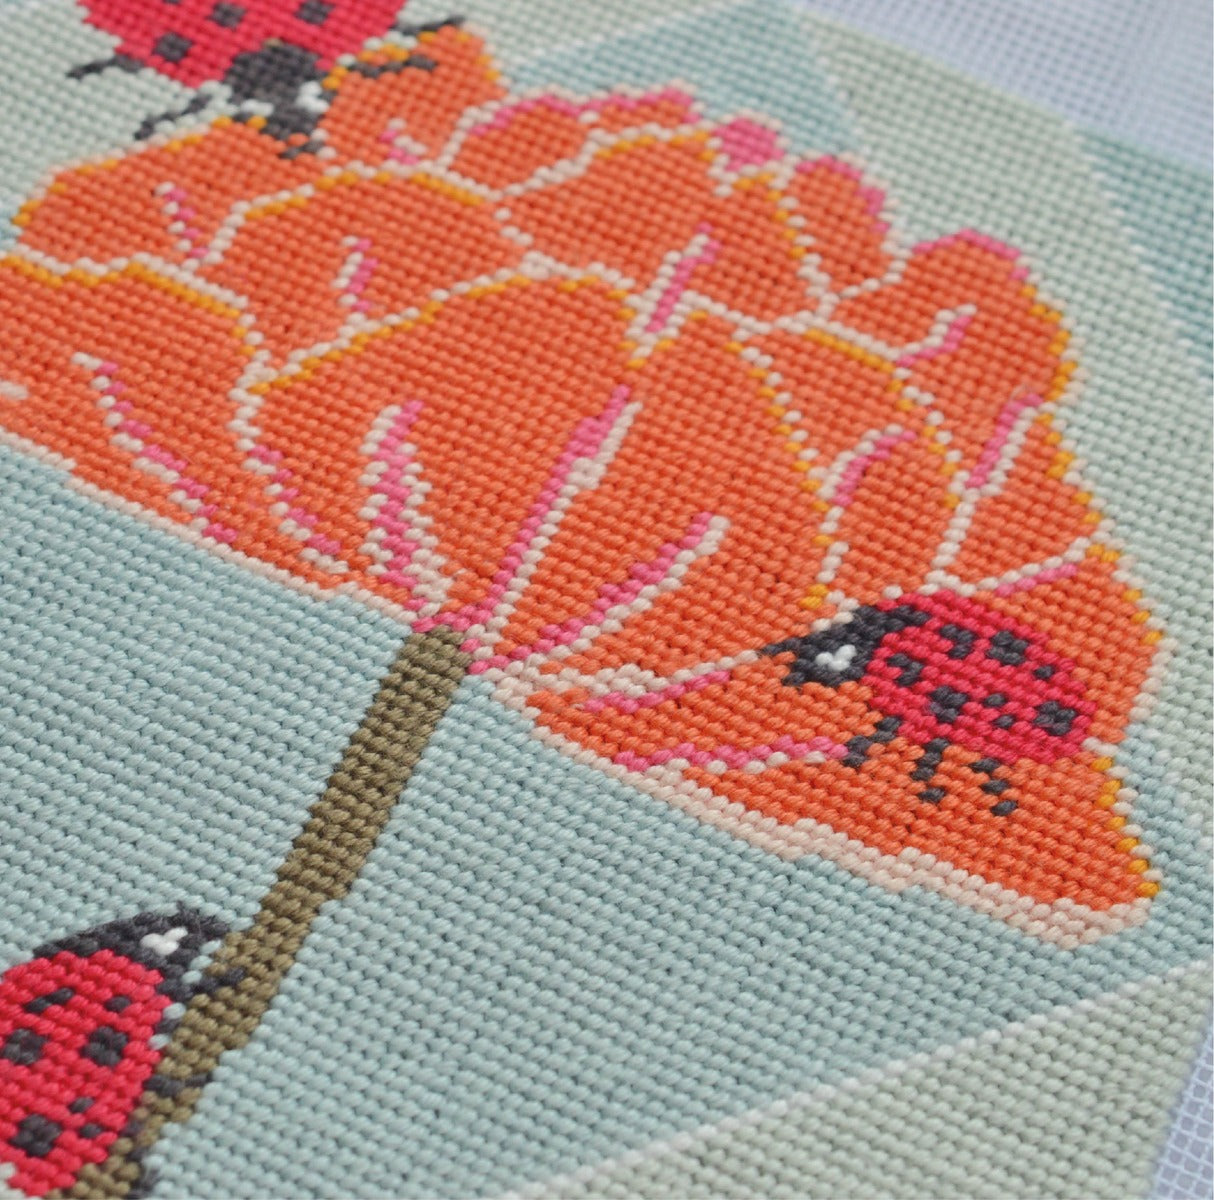 spring tapestry kit with ladybirds, stitched in tent stitch suitable for beginners. 